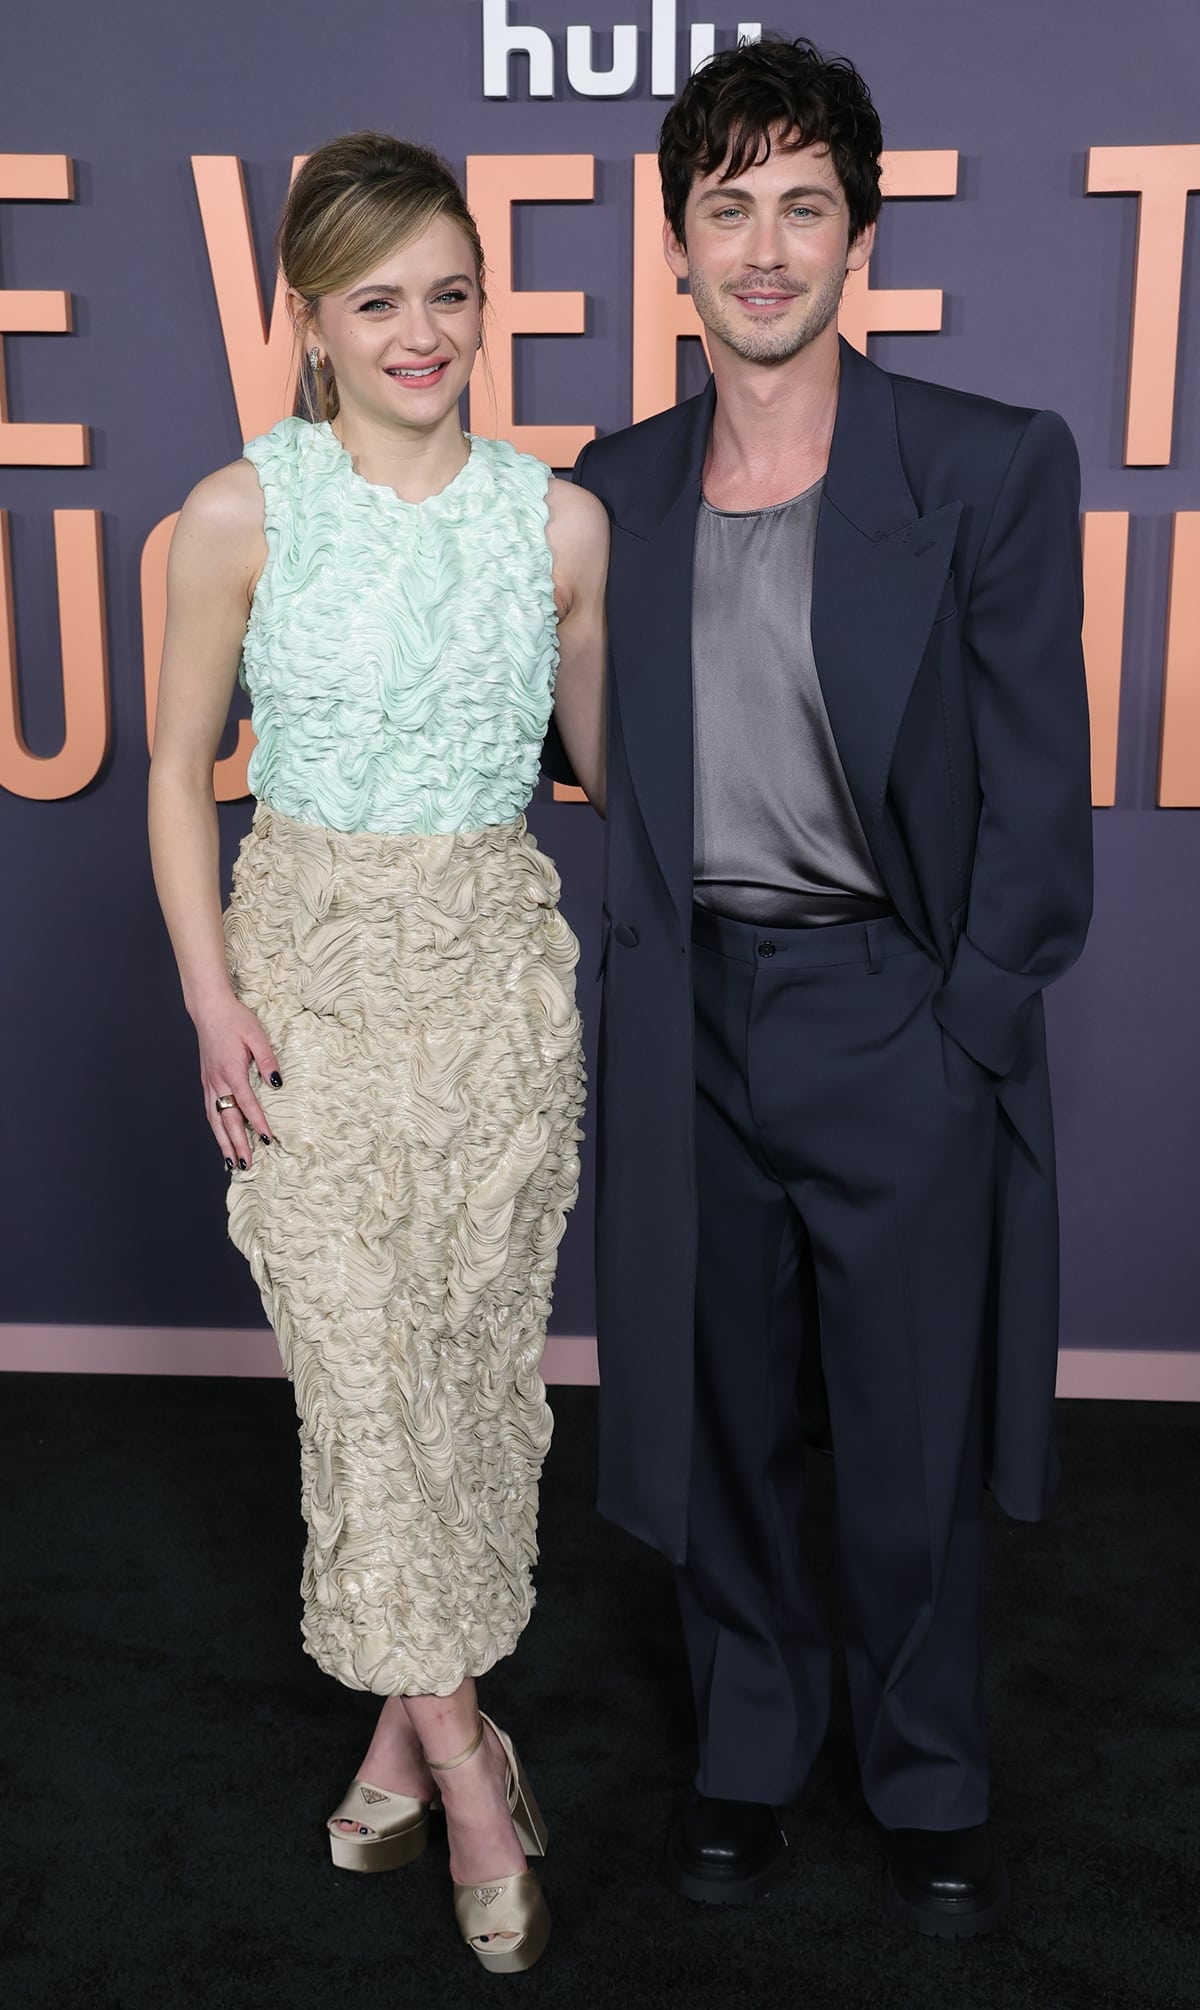 Joey King and Logan Lerman shine together at the Los Angeles premiere of "We Were The Lucky Ones," with Joey in an avant-garde Prada ensemble and Logan showcasing a distinctive style in a satin tank and power shoulder overcoat